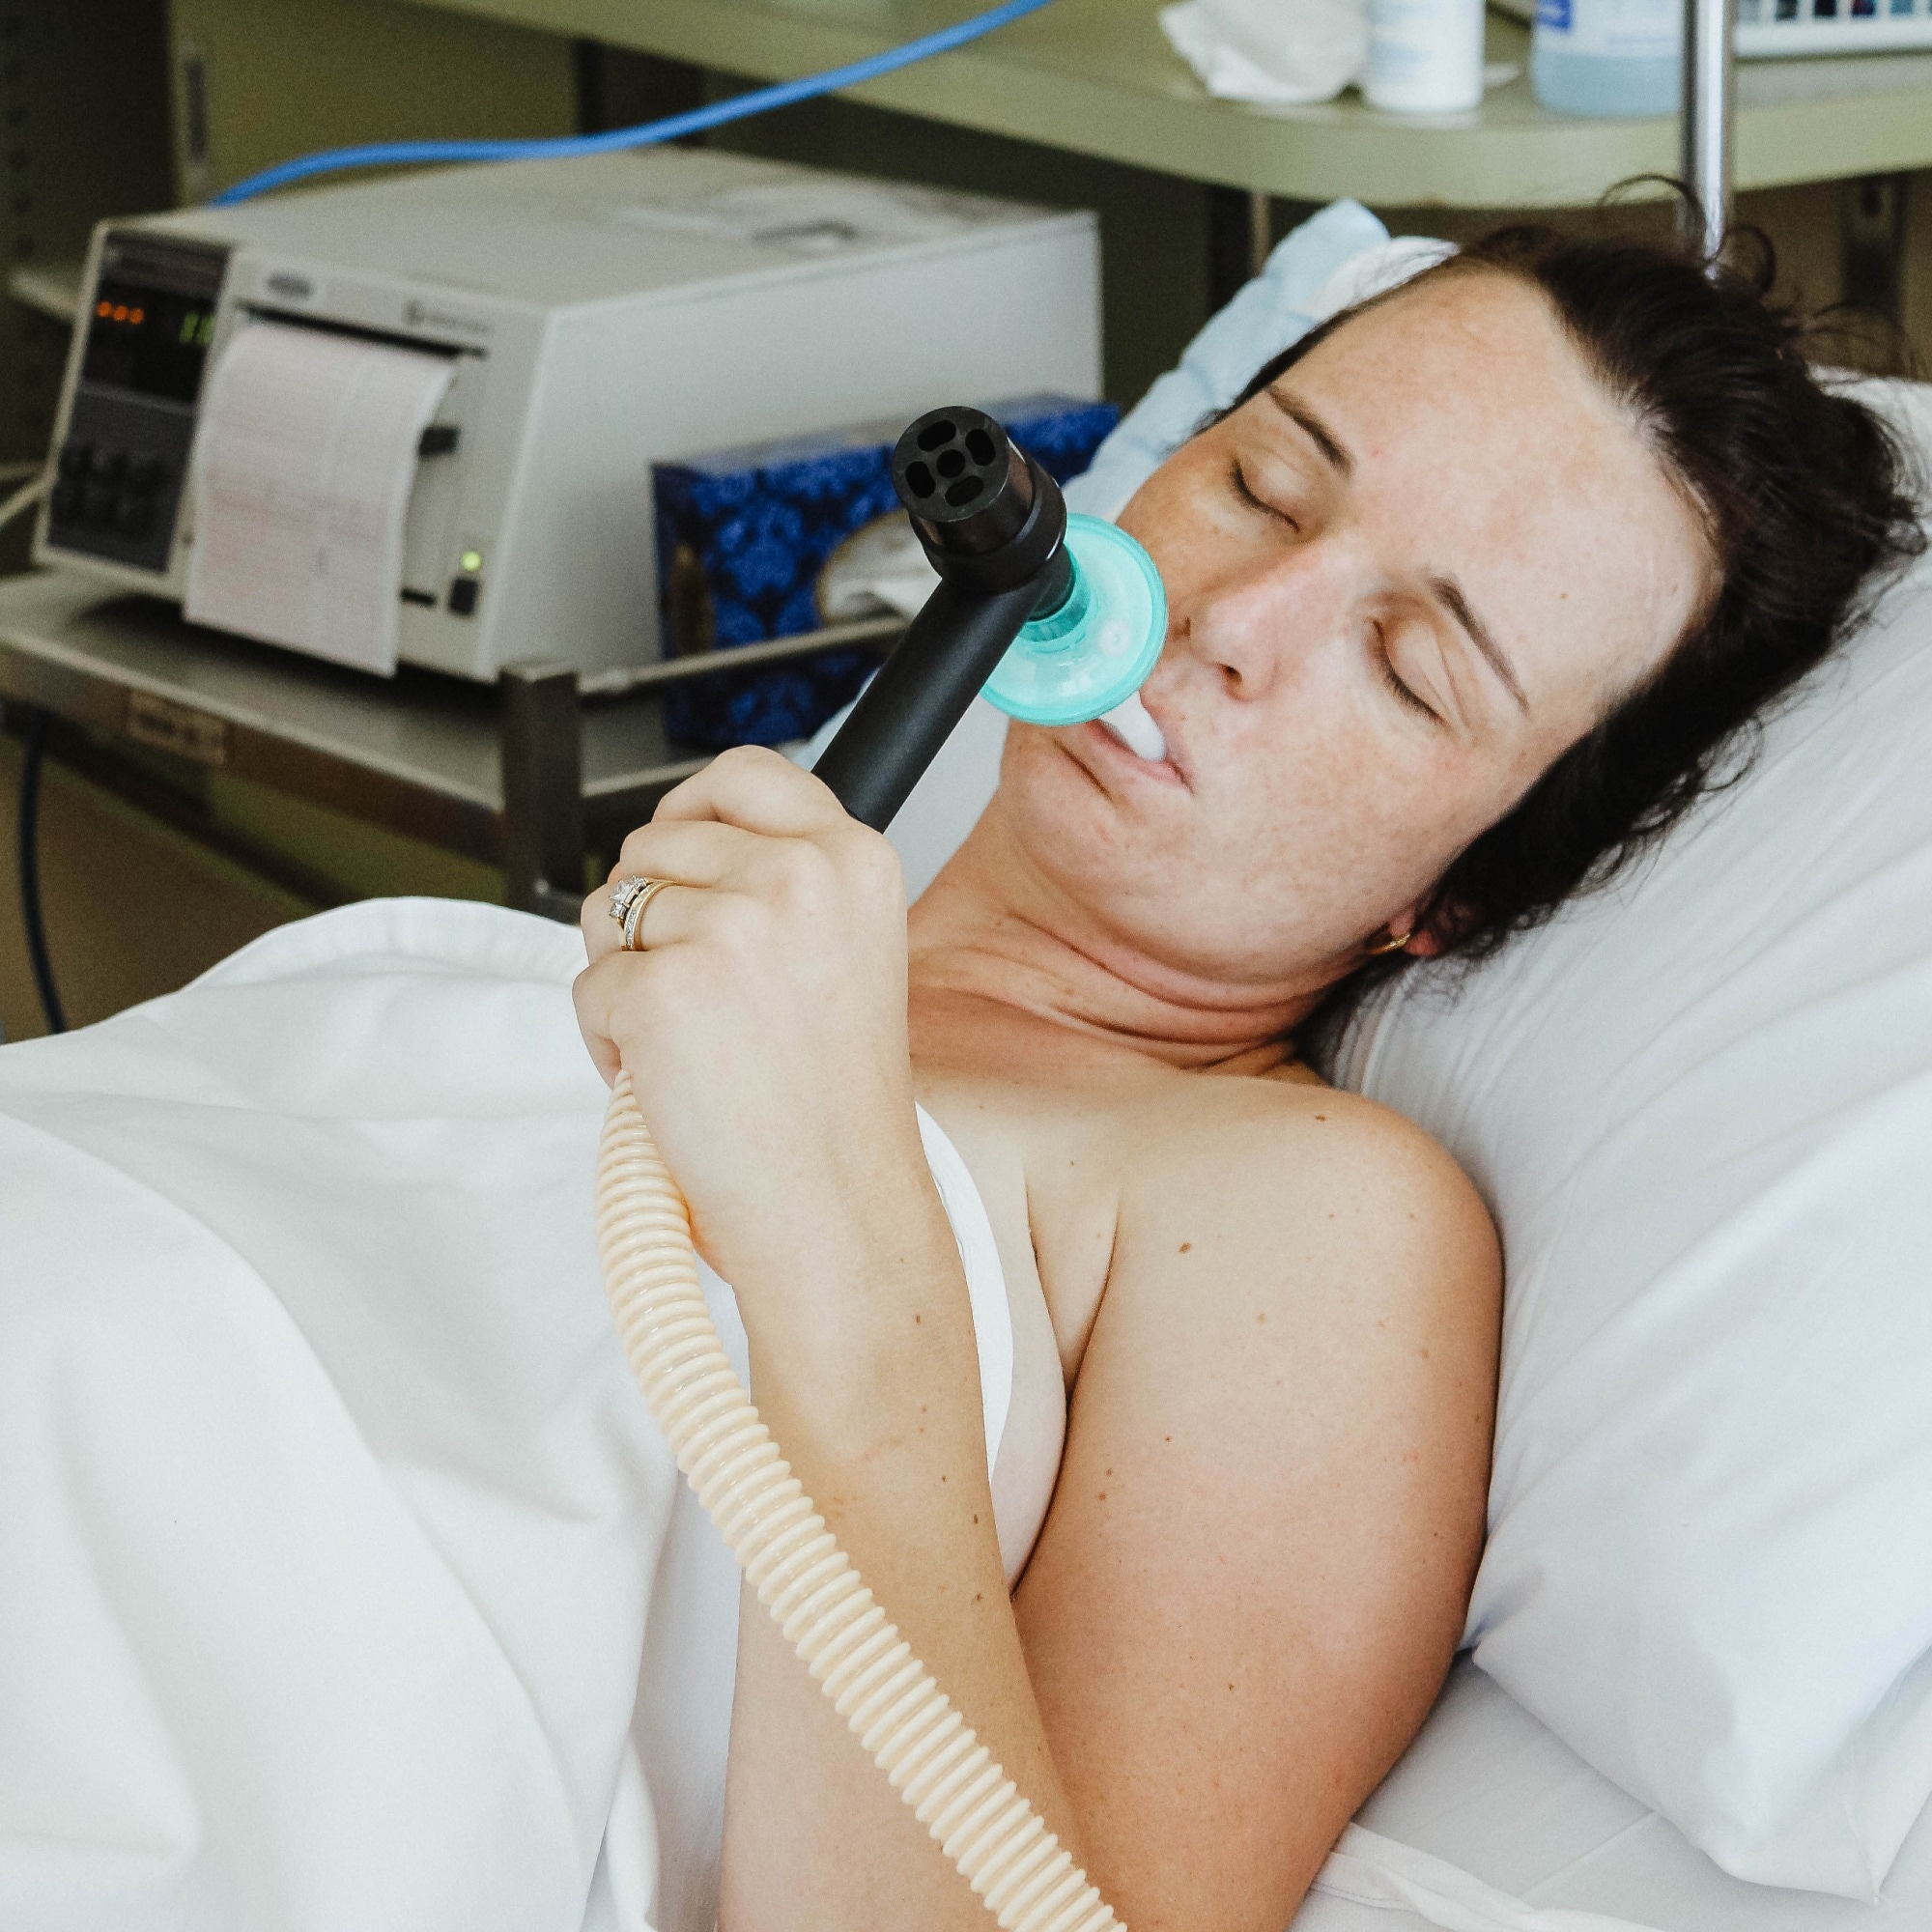 Study determines the impact of withholding nitrous oxide for labor analgesia